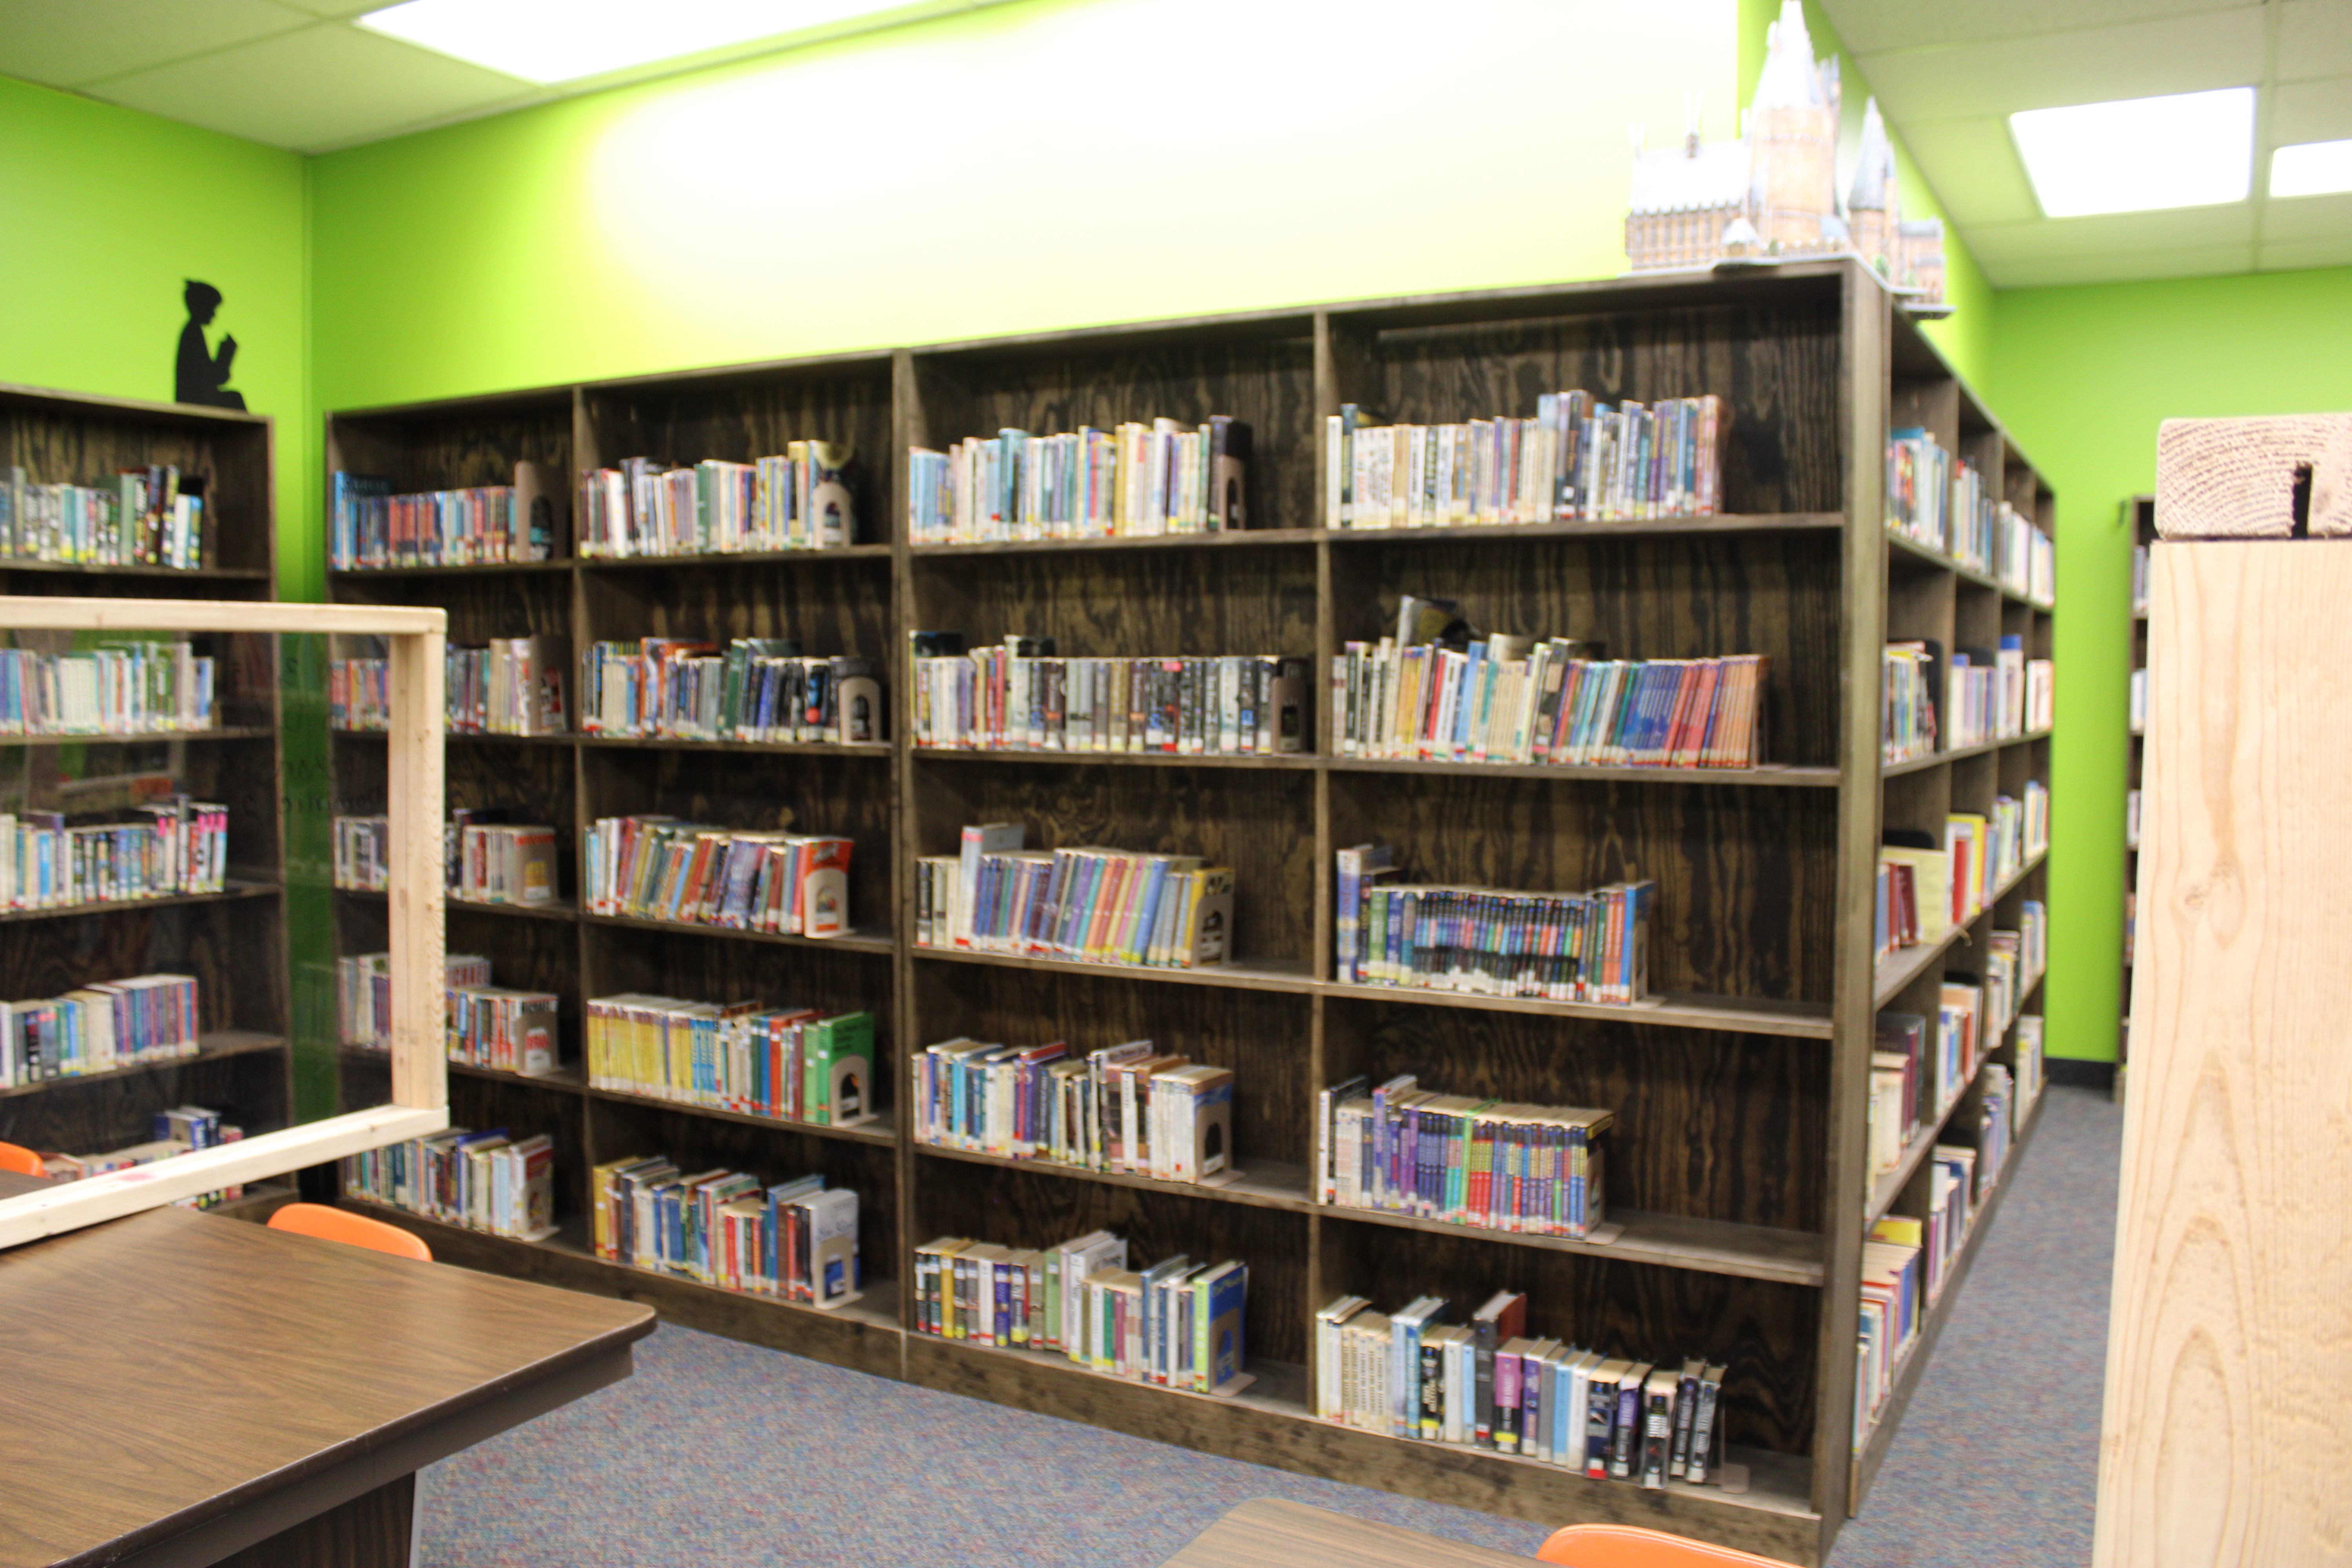 The new bookshelves that were built in 2020 for the Iroquois High School Library. 